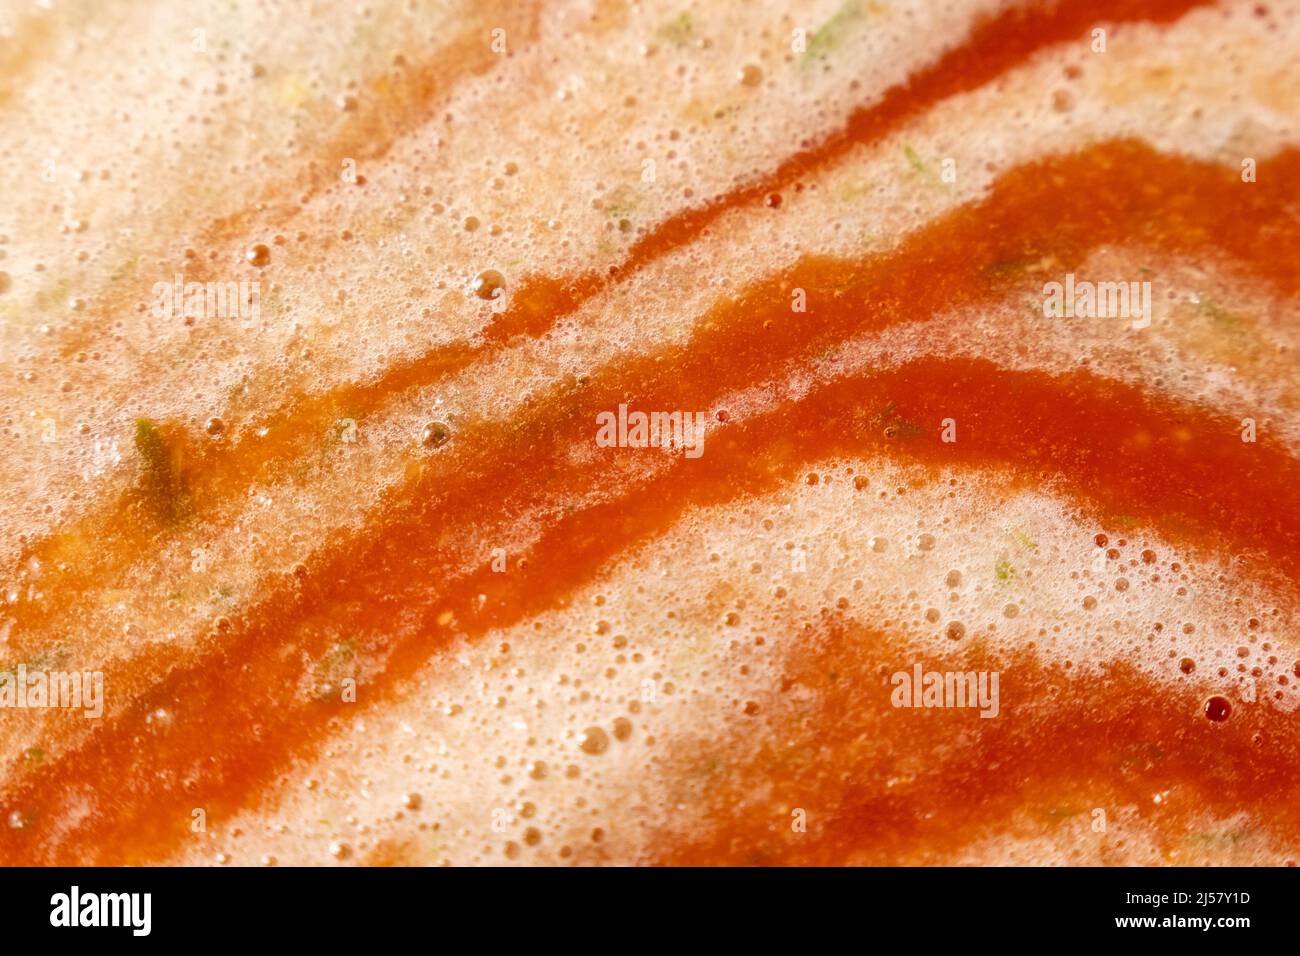 Sauce of ripe tomatoes. The texture of tomato sauce. Soups and other vegetable dishes. Stock Photo